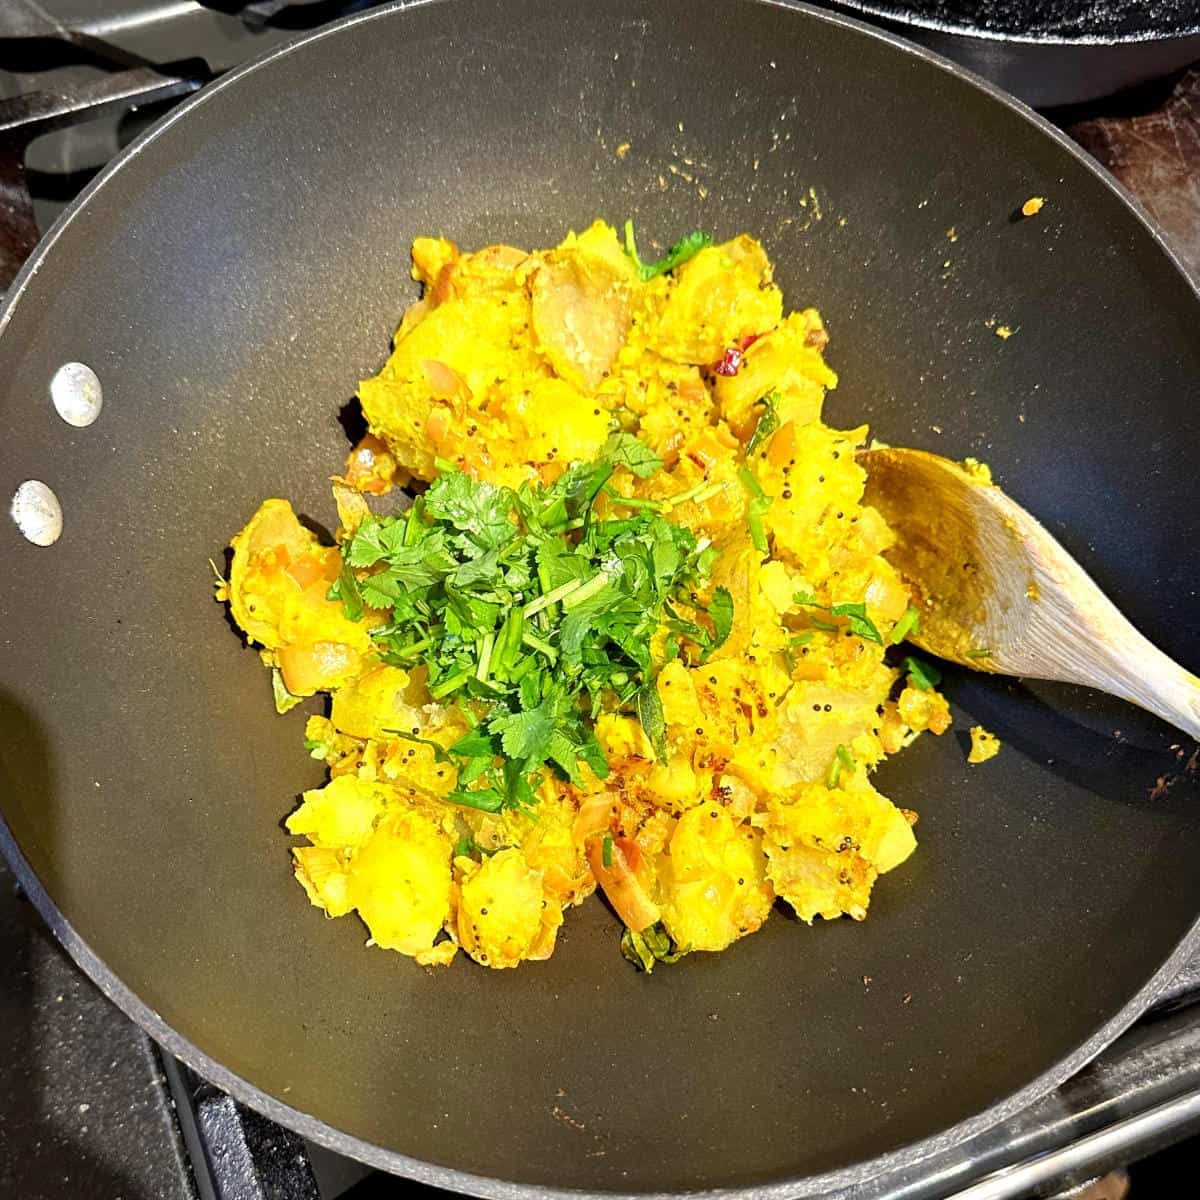 Cilantro added to potatoes in wok.